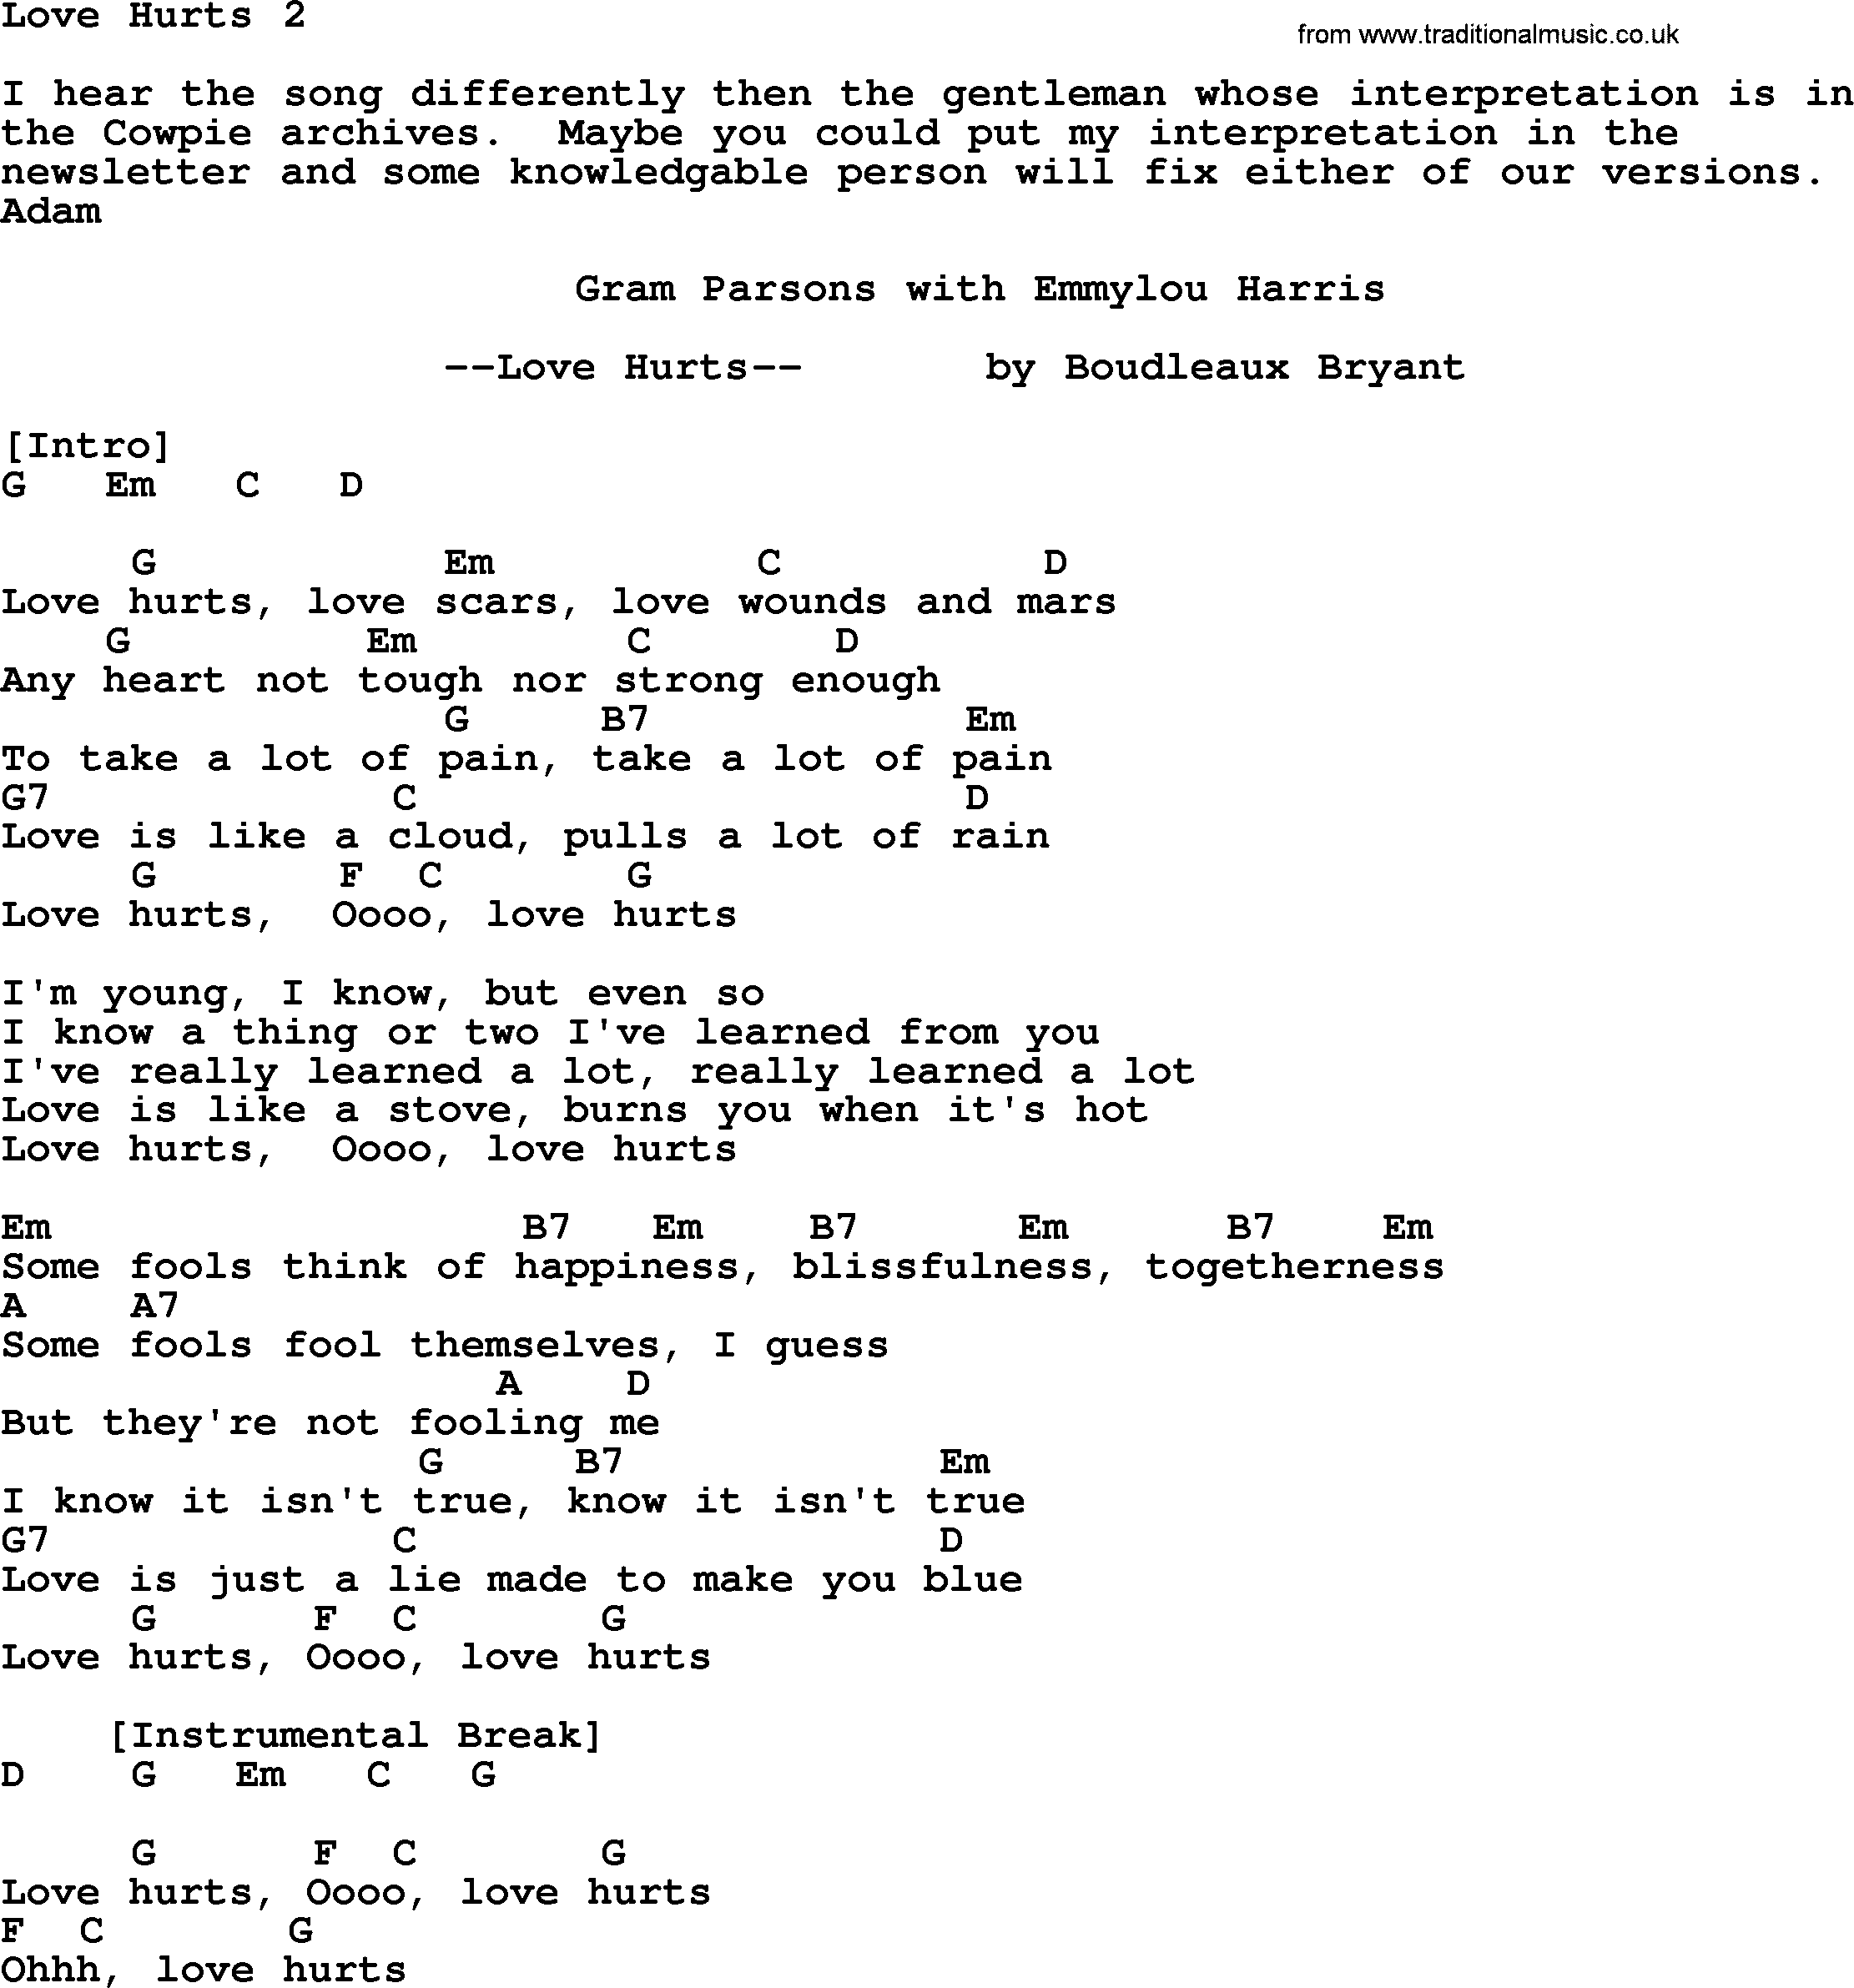 Bluegrass song: Love Hurts 2, lyrics and chords